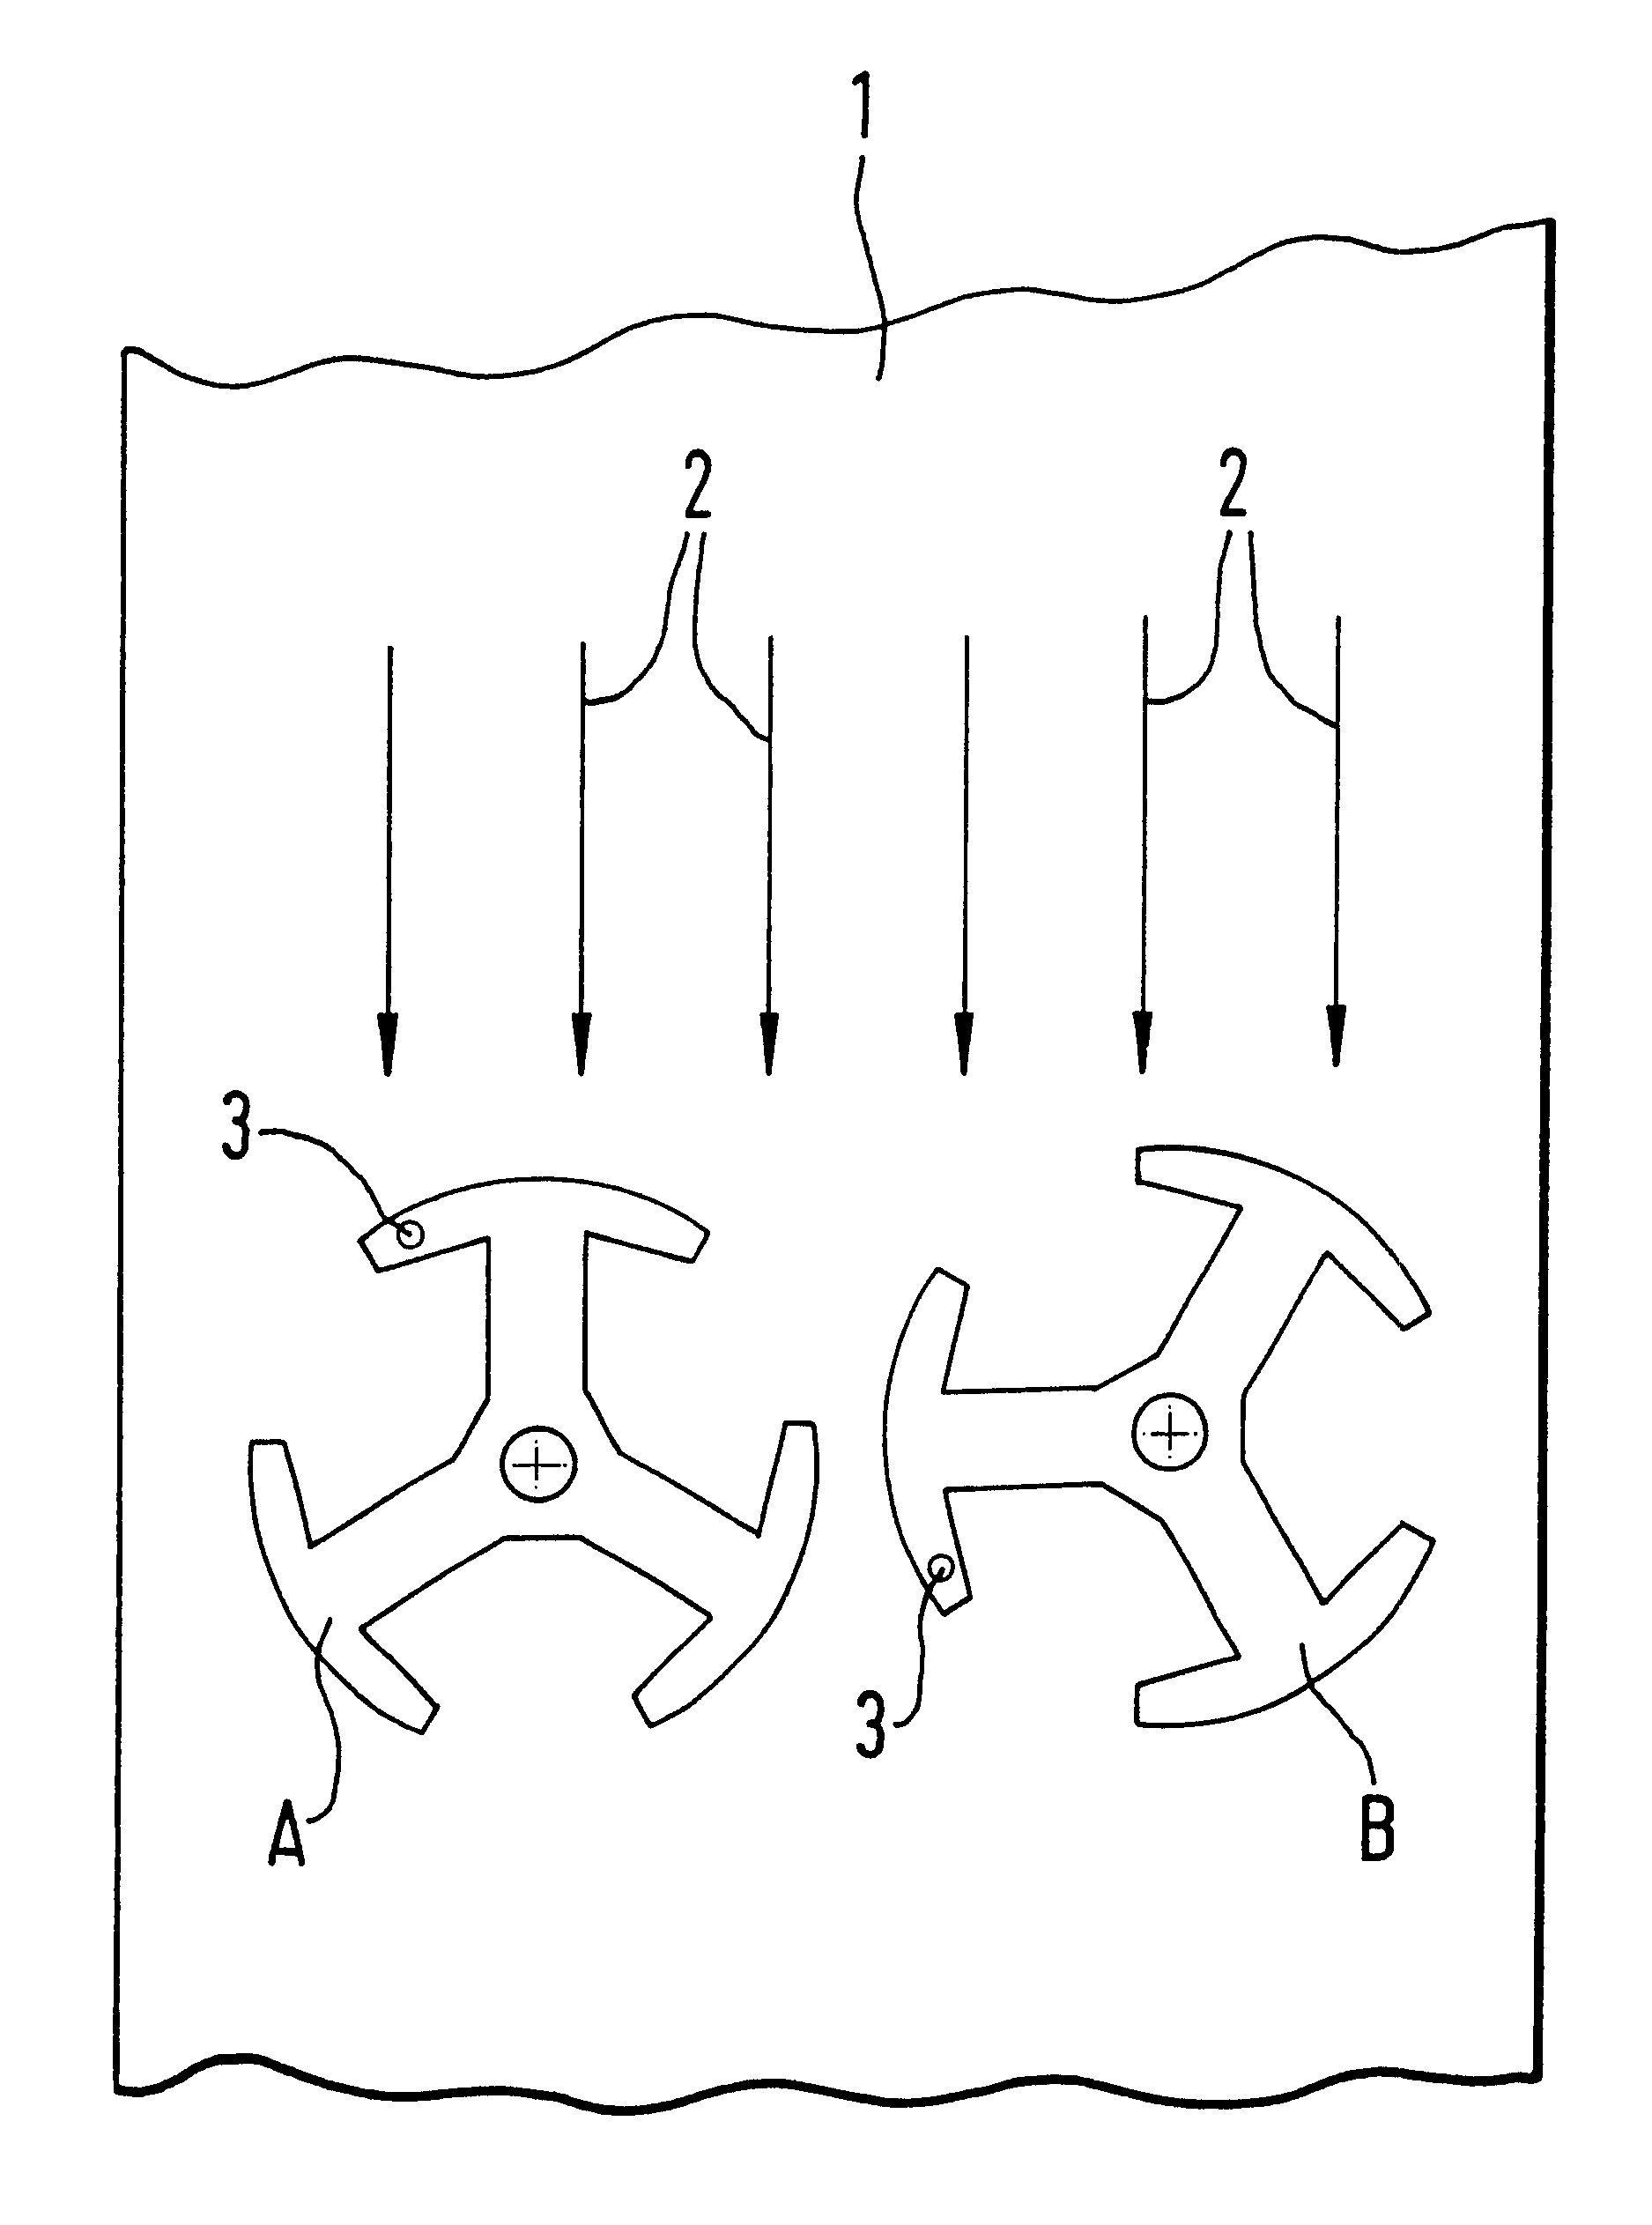 Process for manufacturing a rotor or stator of an electric machine out of sheet metal blanks